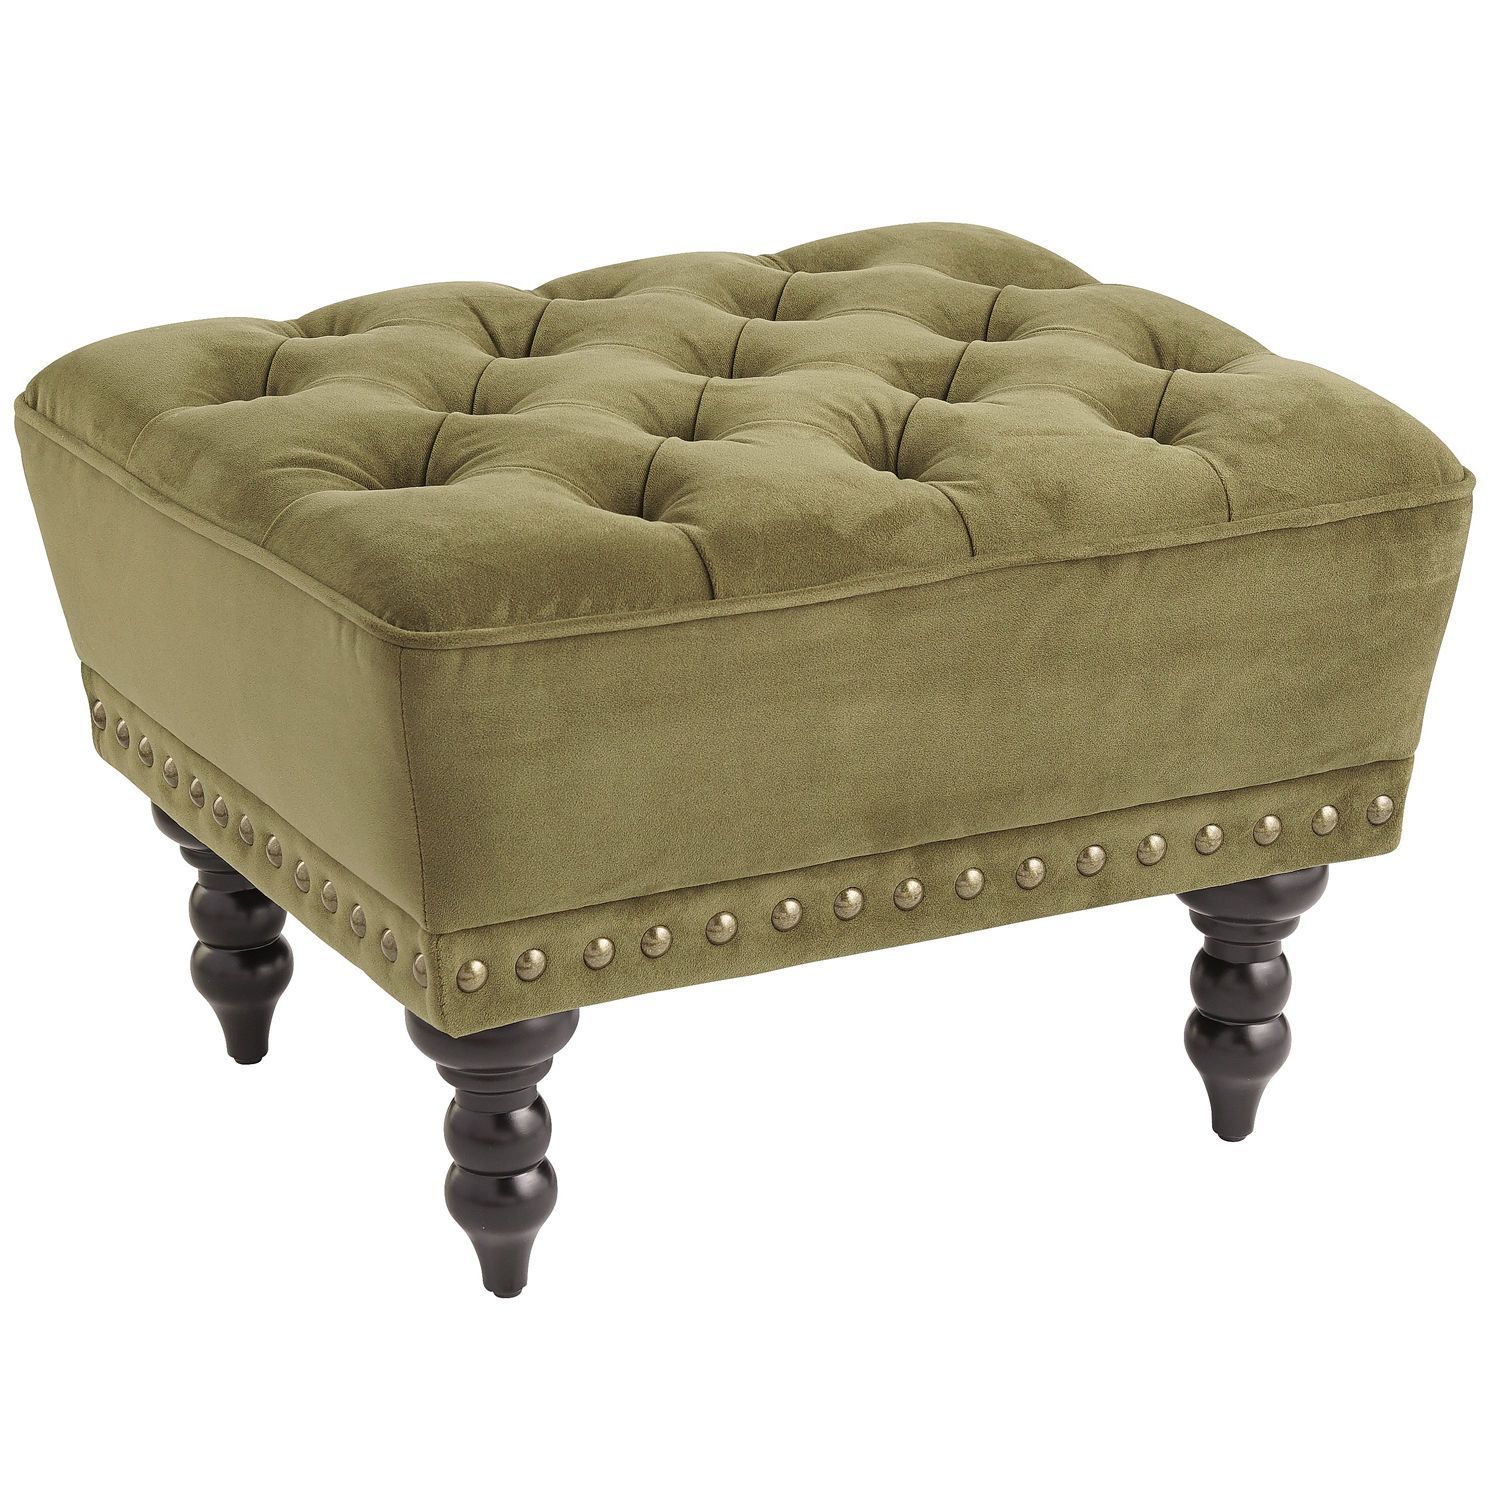 Chas Olive Green Velvet Ottoman | Velvet Ottoman, Brown Living Room With Regard To Gray Fabric Round Modern Ottomans With Rope Trim (View 3 of 20)